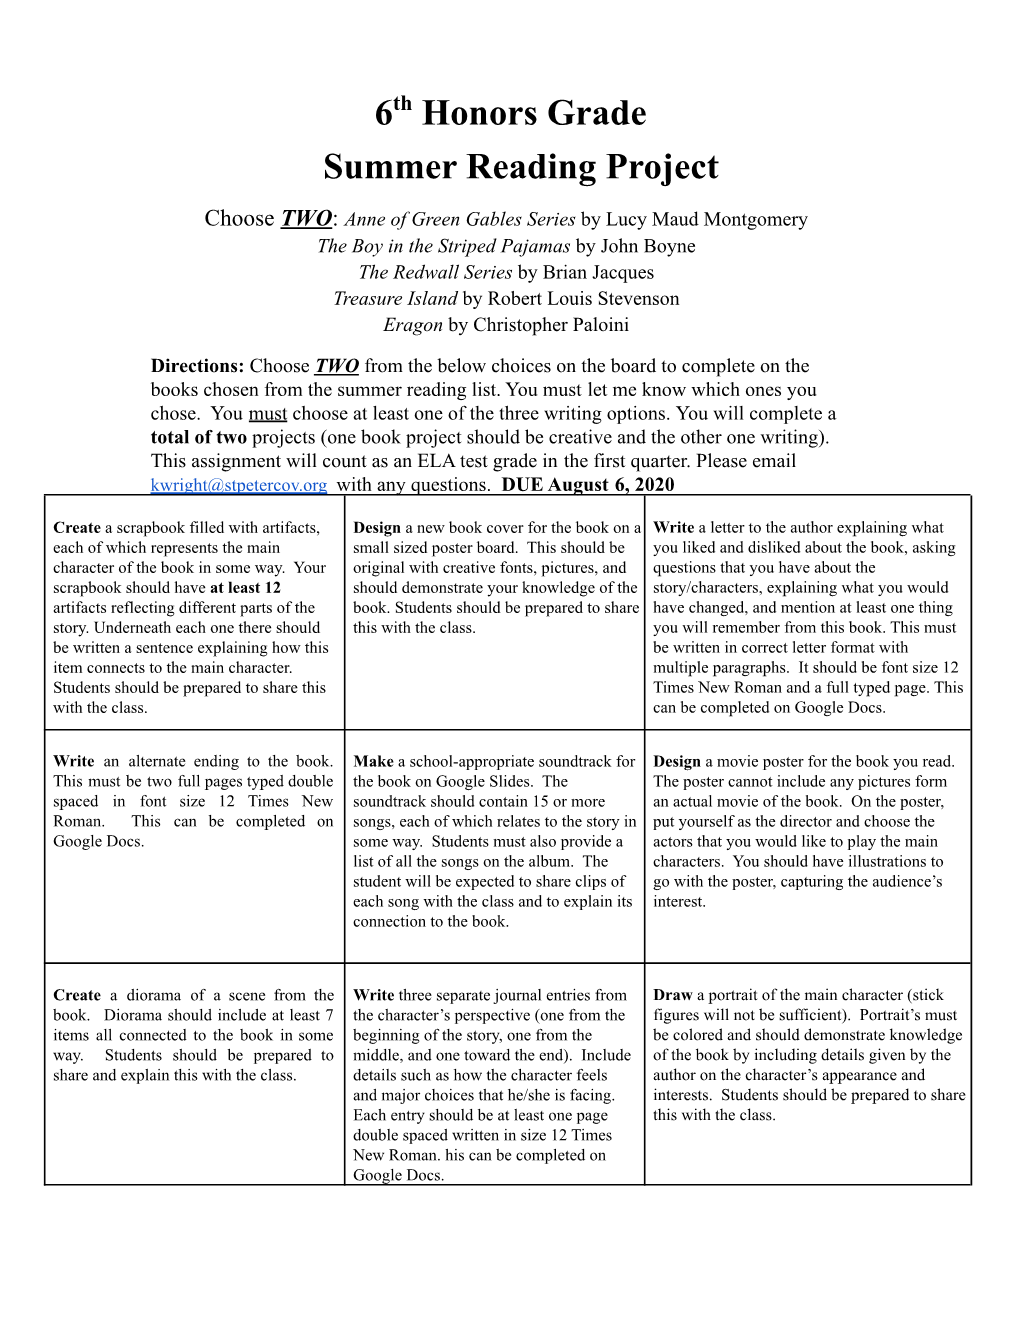 6Th Honors Summer Reading Project 2021